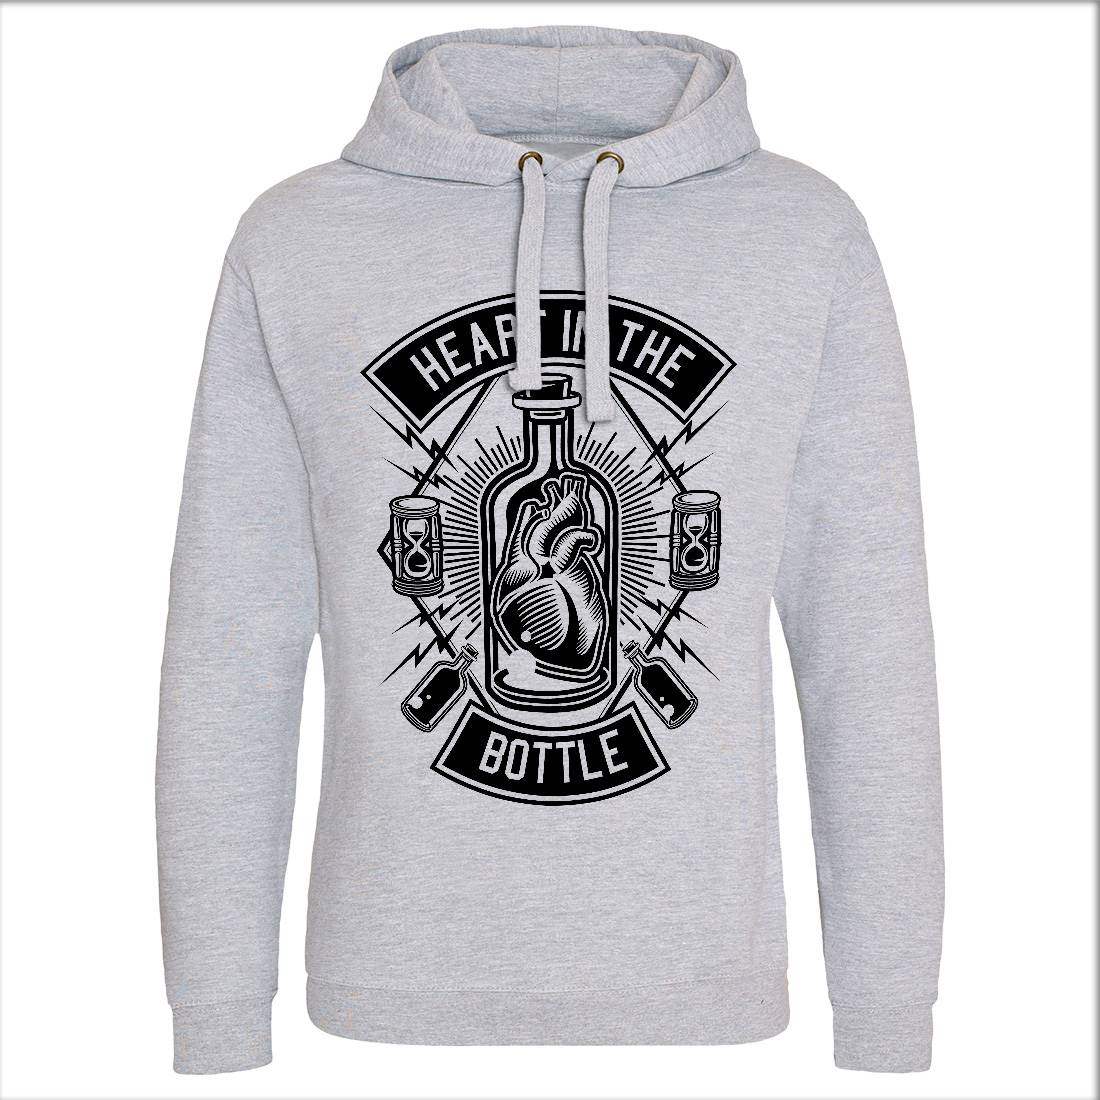 Heart In The Bottle Mens Hoodie Without Pocket Navy B552